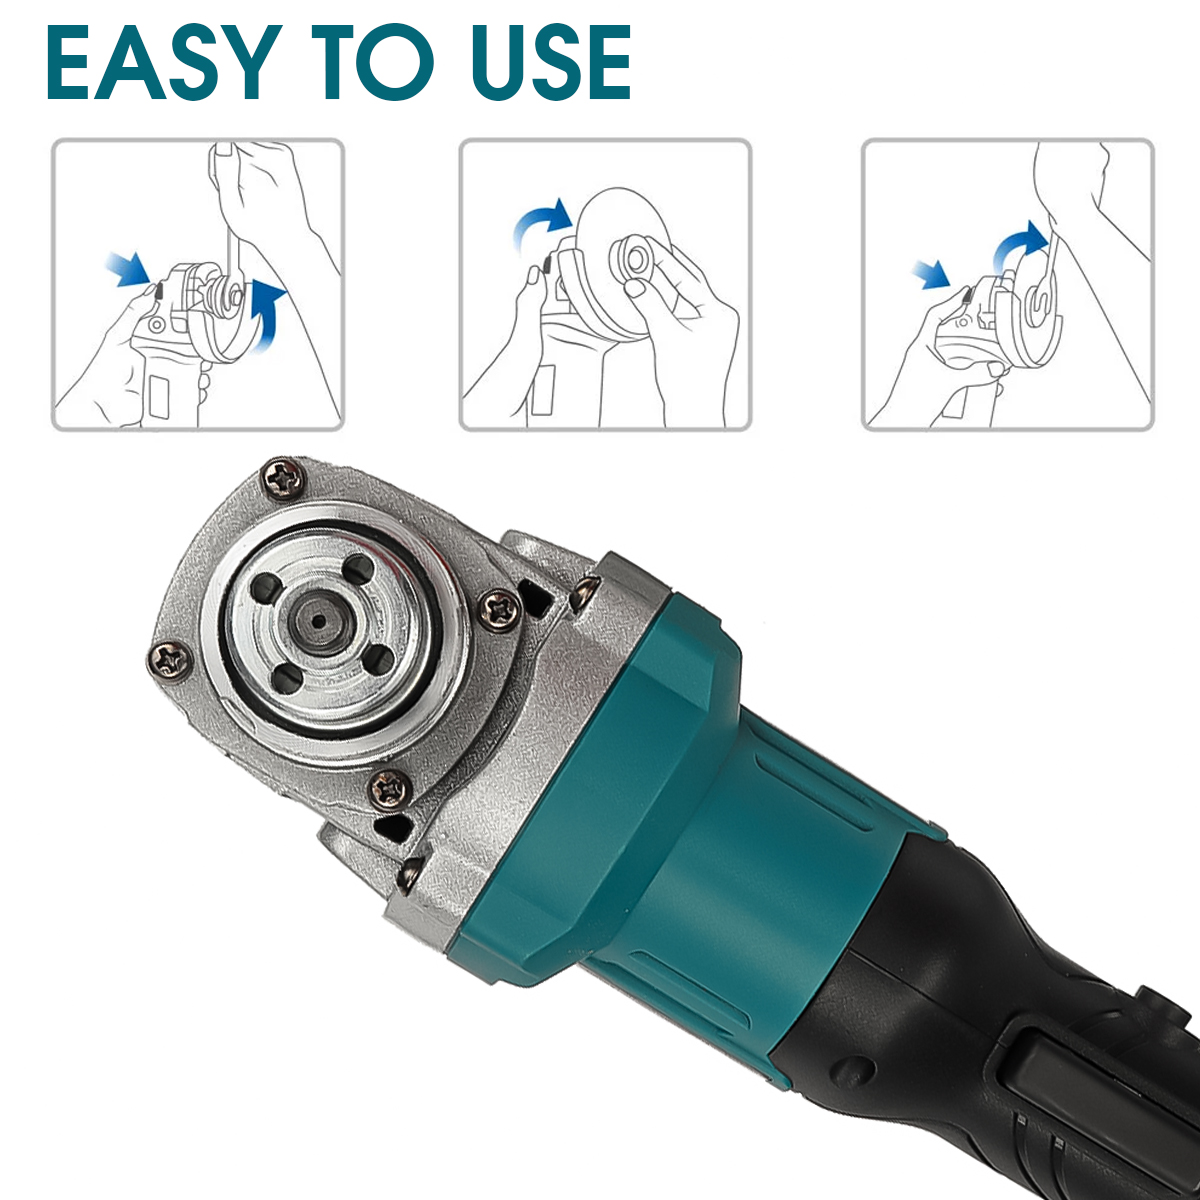 100mm-1580W-Electric-Cordless-Brushless-Angle-Grinder-Grinding-Cutting-Machine-Tool-Fit-Makita-EU-Pl-1891857-8